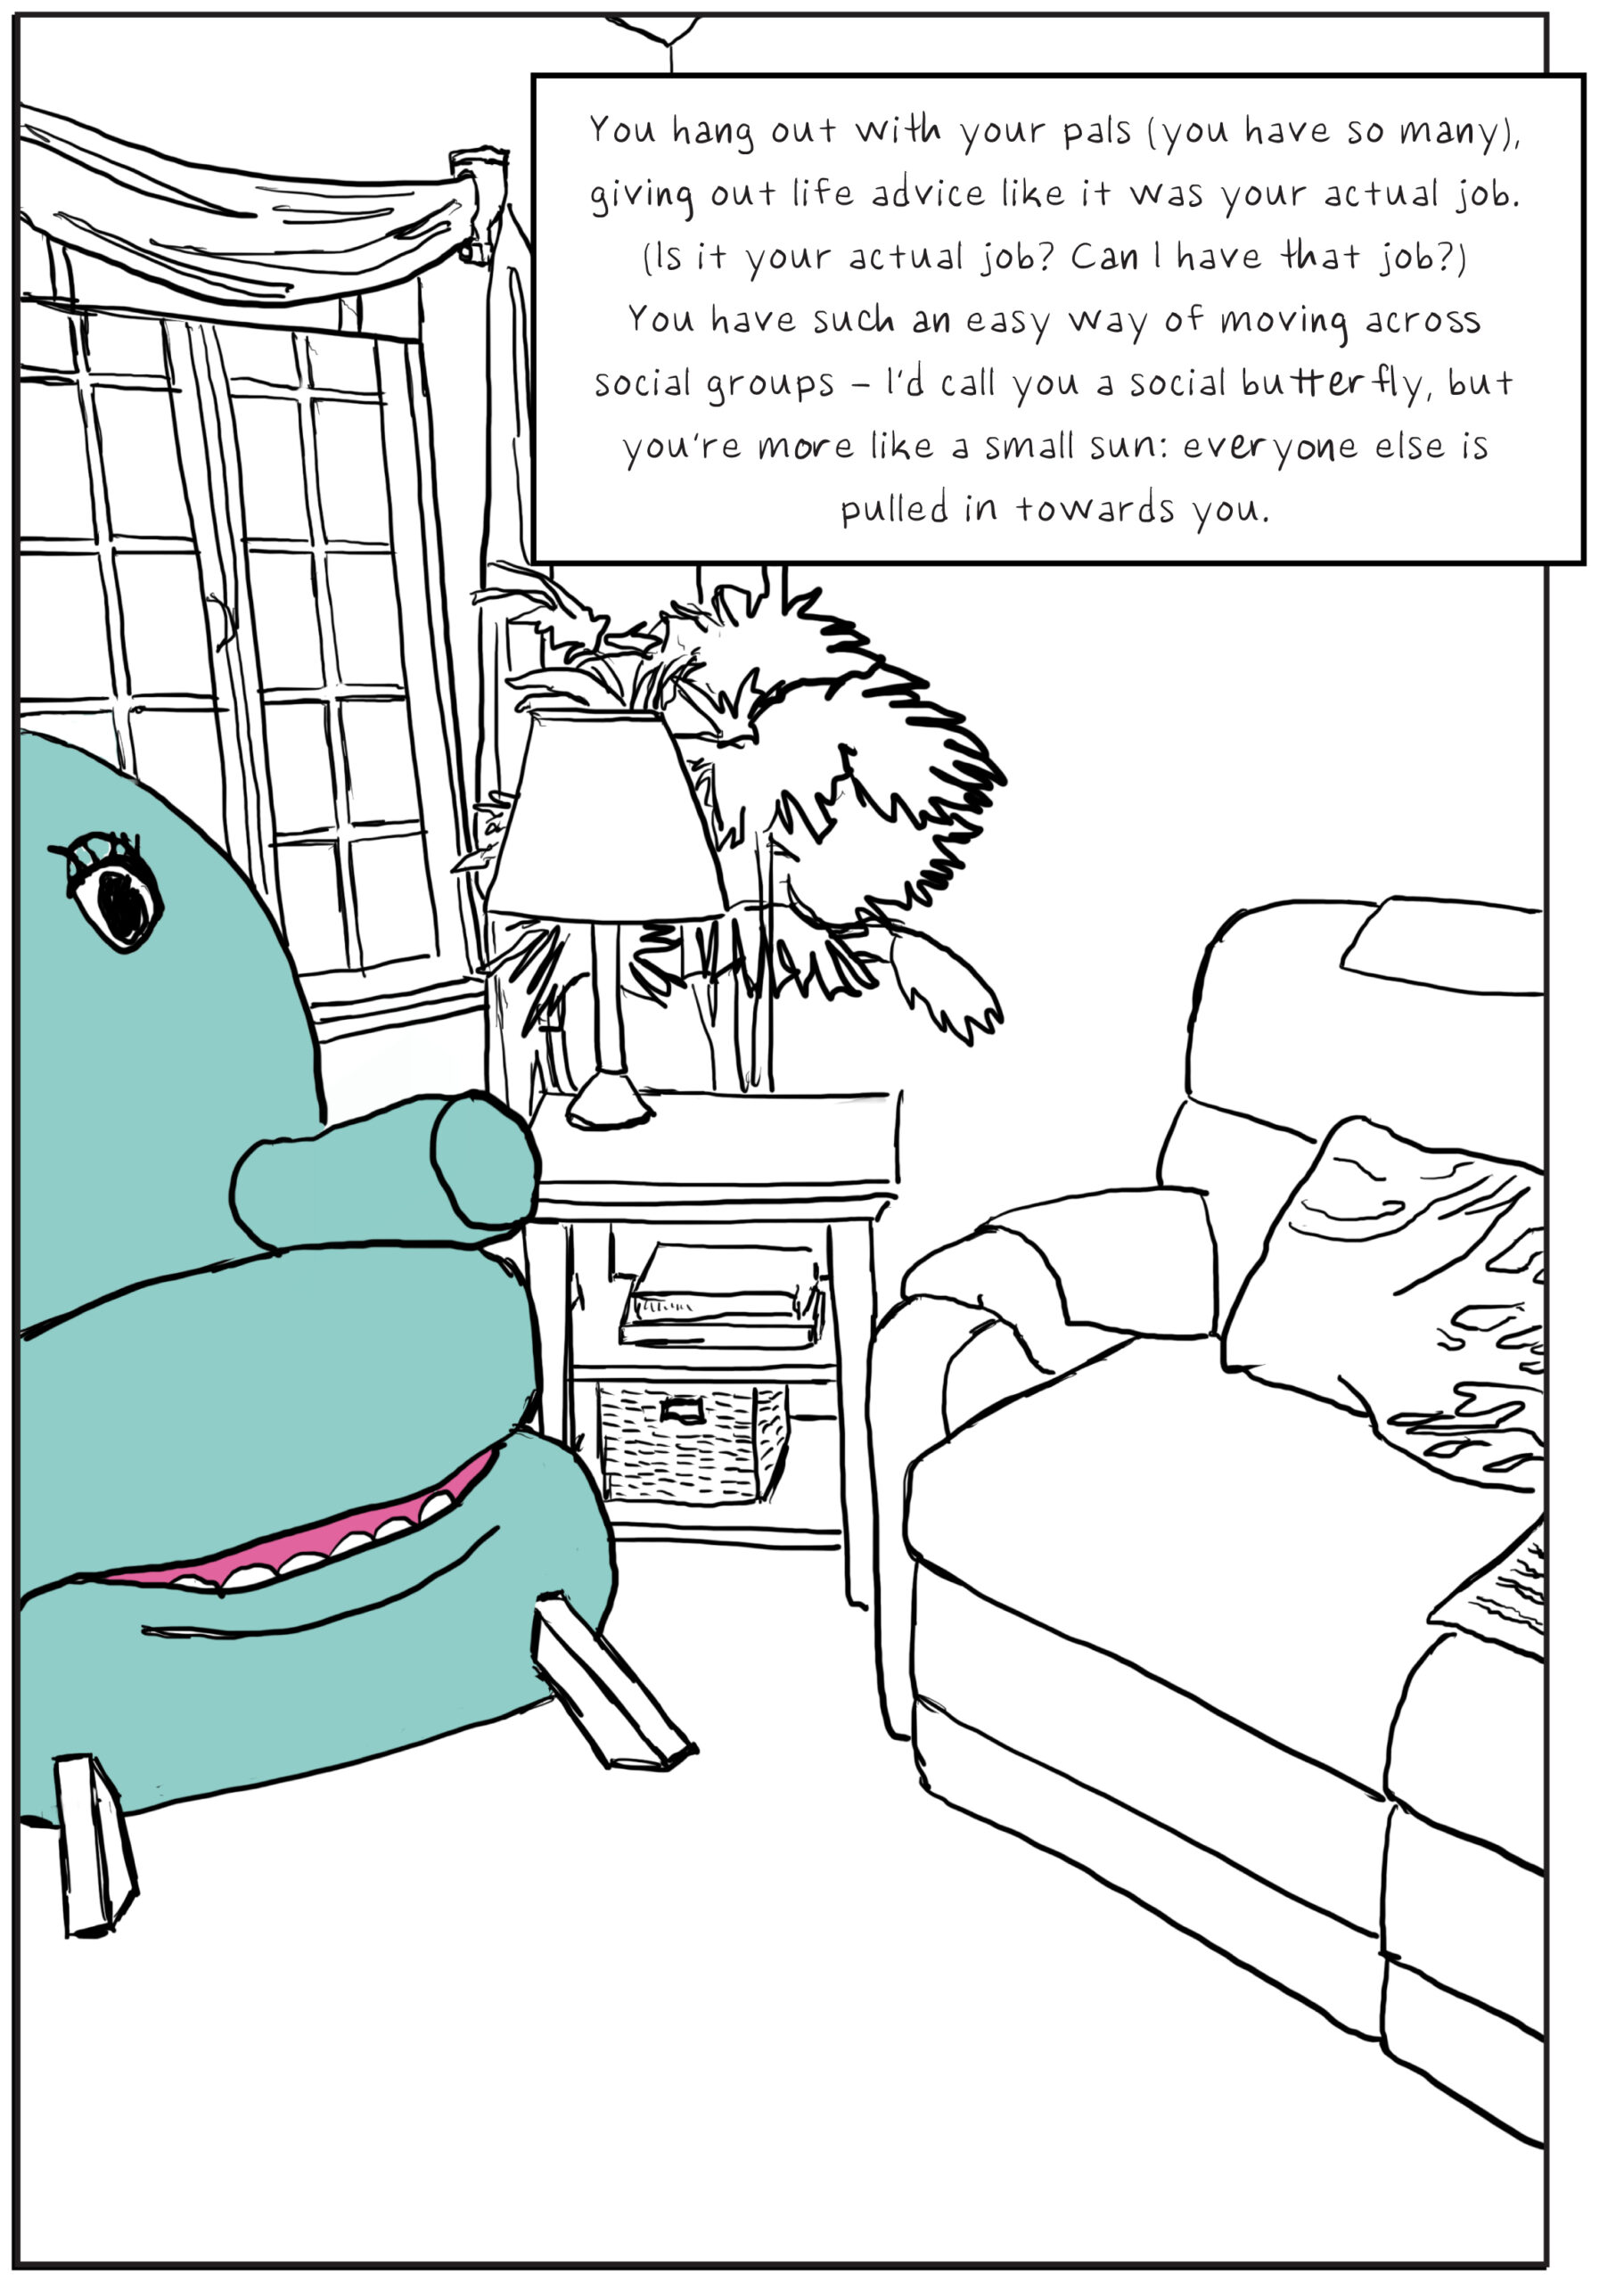 A black-and-white line drawing of a 1980s living room. Only the armchair is rendered in color – it's a seafoam turquoise and has eyes and a friendly, grinning mouth. Text: You hang out with your pals (you have so many), giving out life advice like it was your actual job. (Is it your actual job? Can I have that job?) You have such an easy way of moving across social groups – I’d call you a social butterfly, but you’re more like a small sun: everyone else is pulled in towards you.